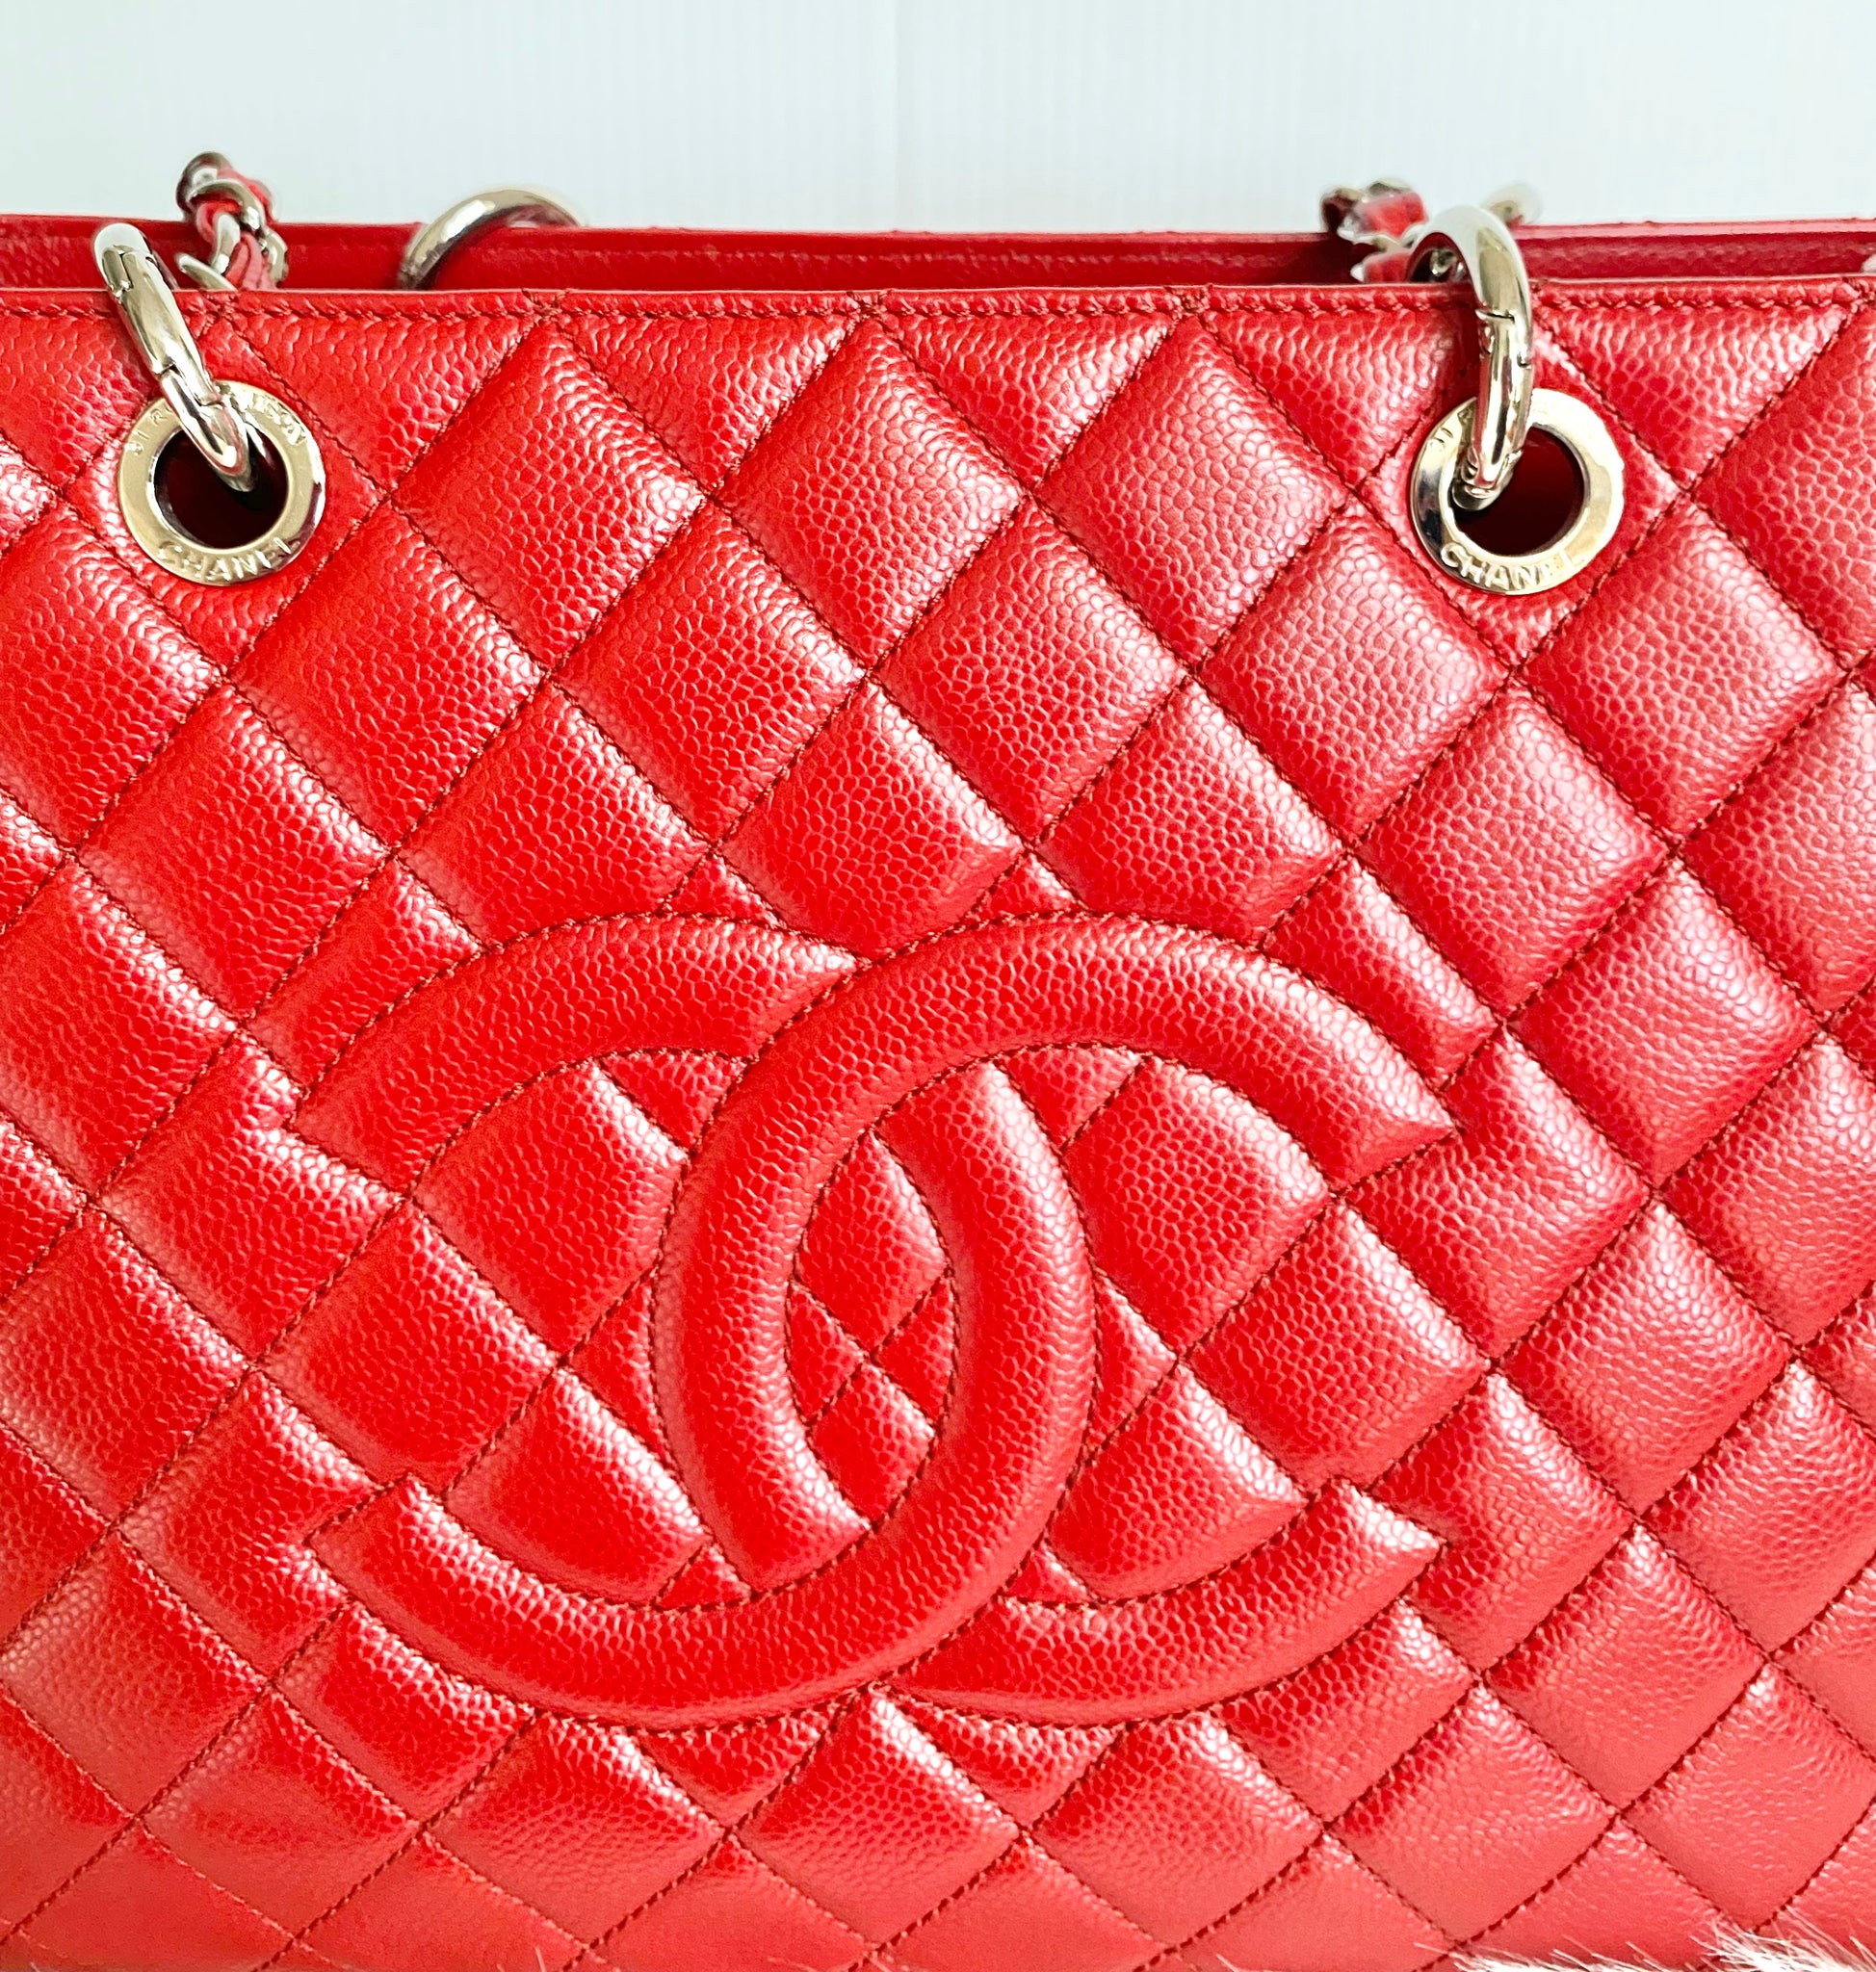 AUTHENTIC Chanel GST Grand Shopping Tote Red Caviar PREOWNED